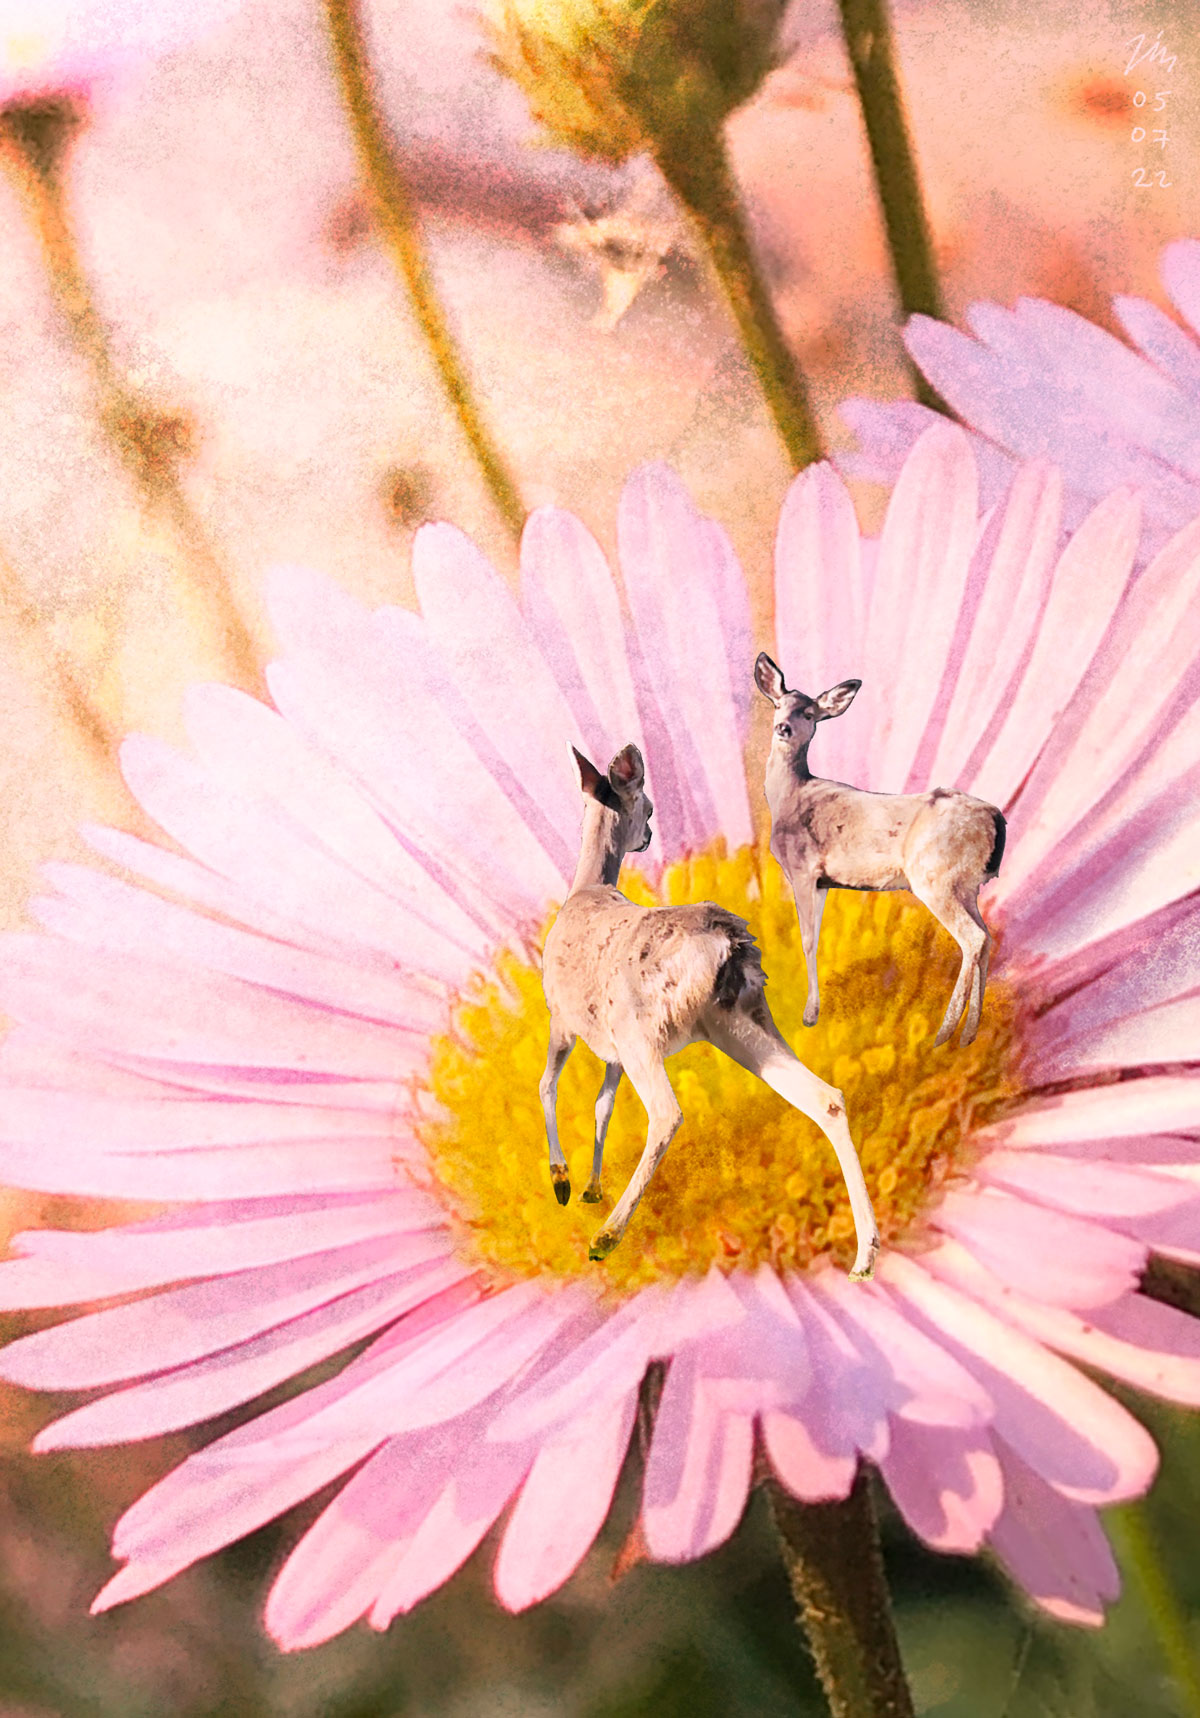 Deerest Friends, a surreal photo collage featuring two deer prancing on a daisy by Liz Broekhuyse